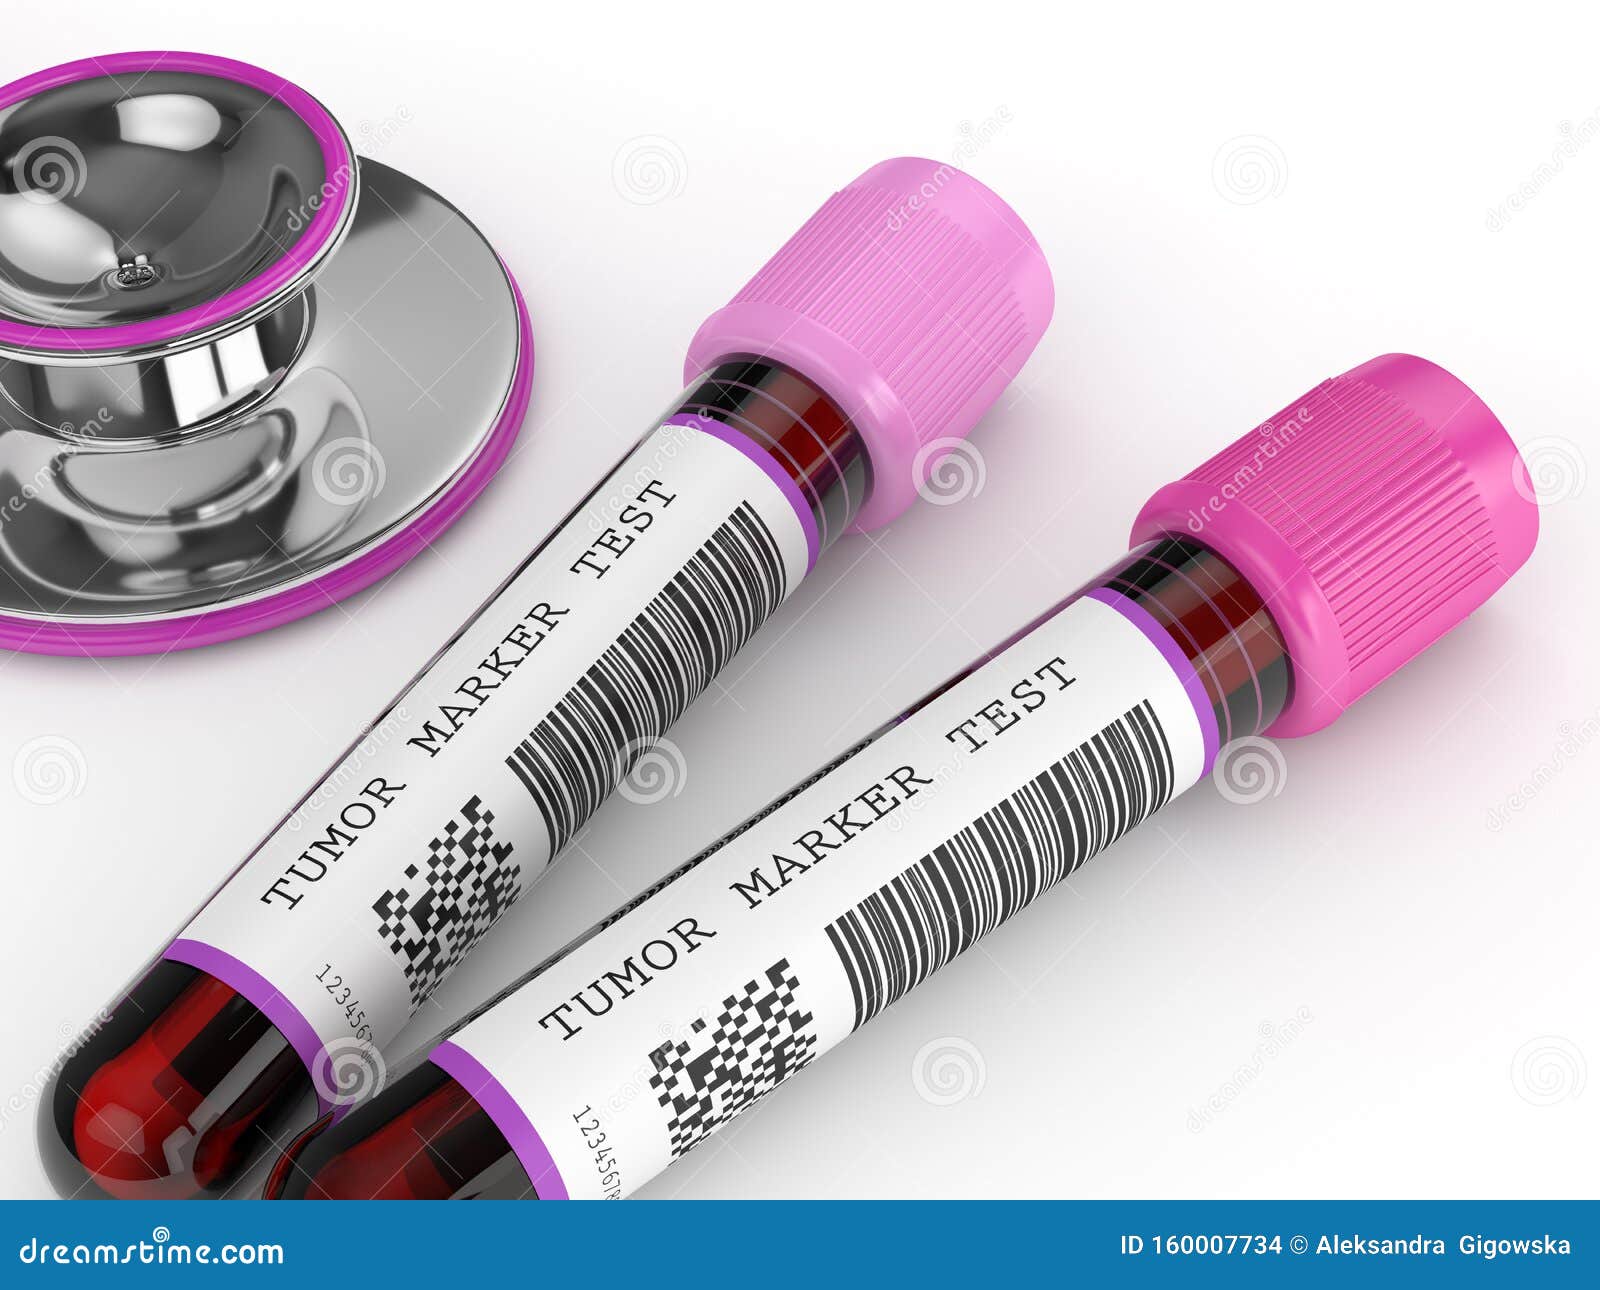 3d render of  blood samples with tumor markers test